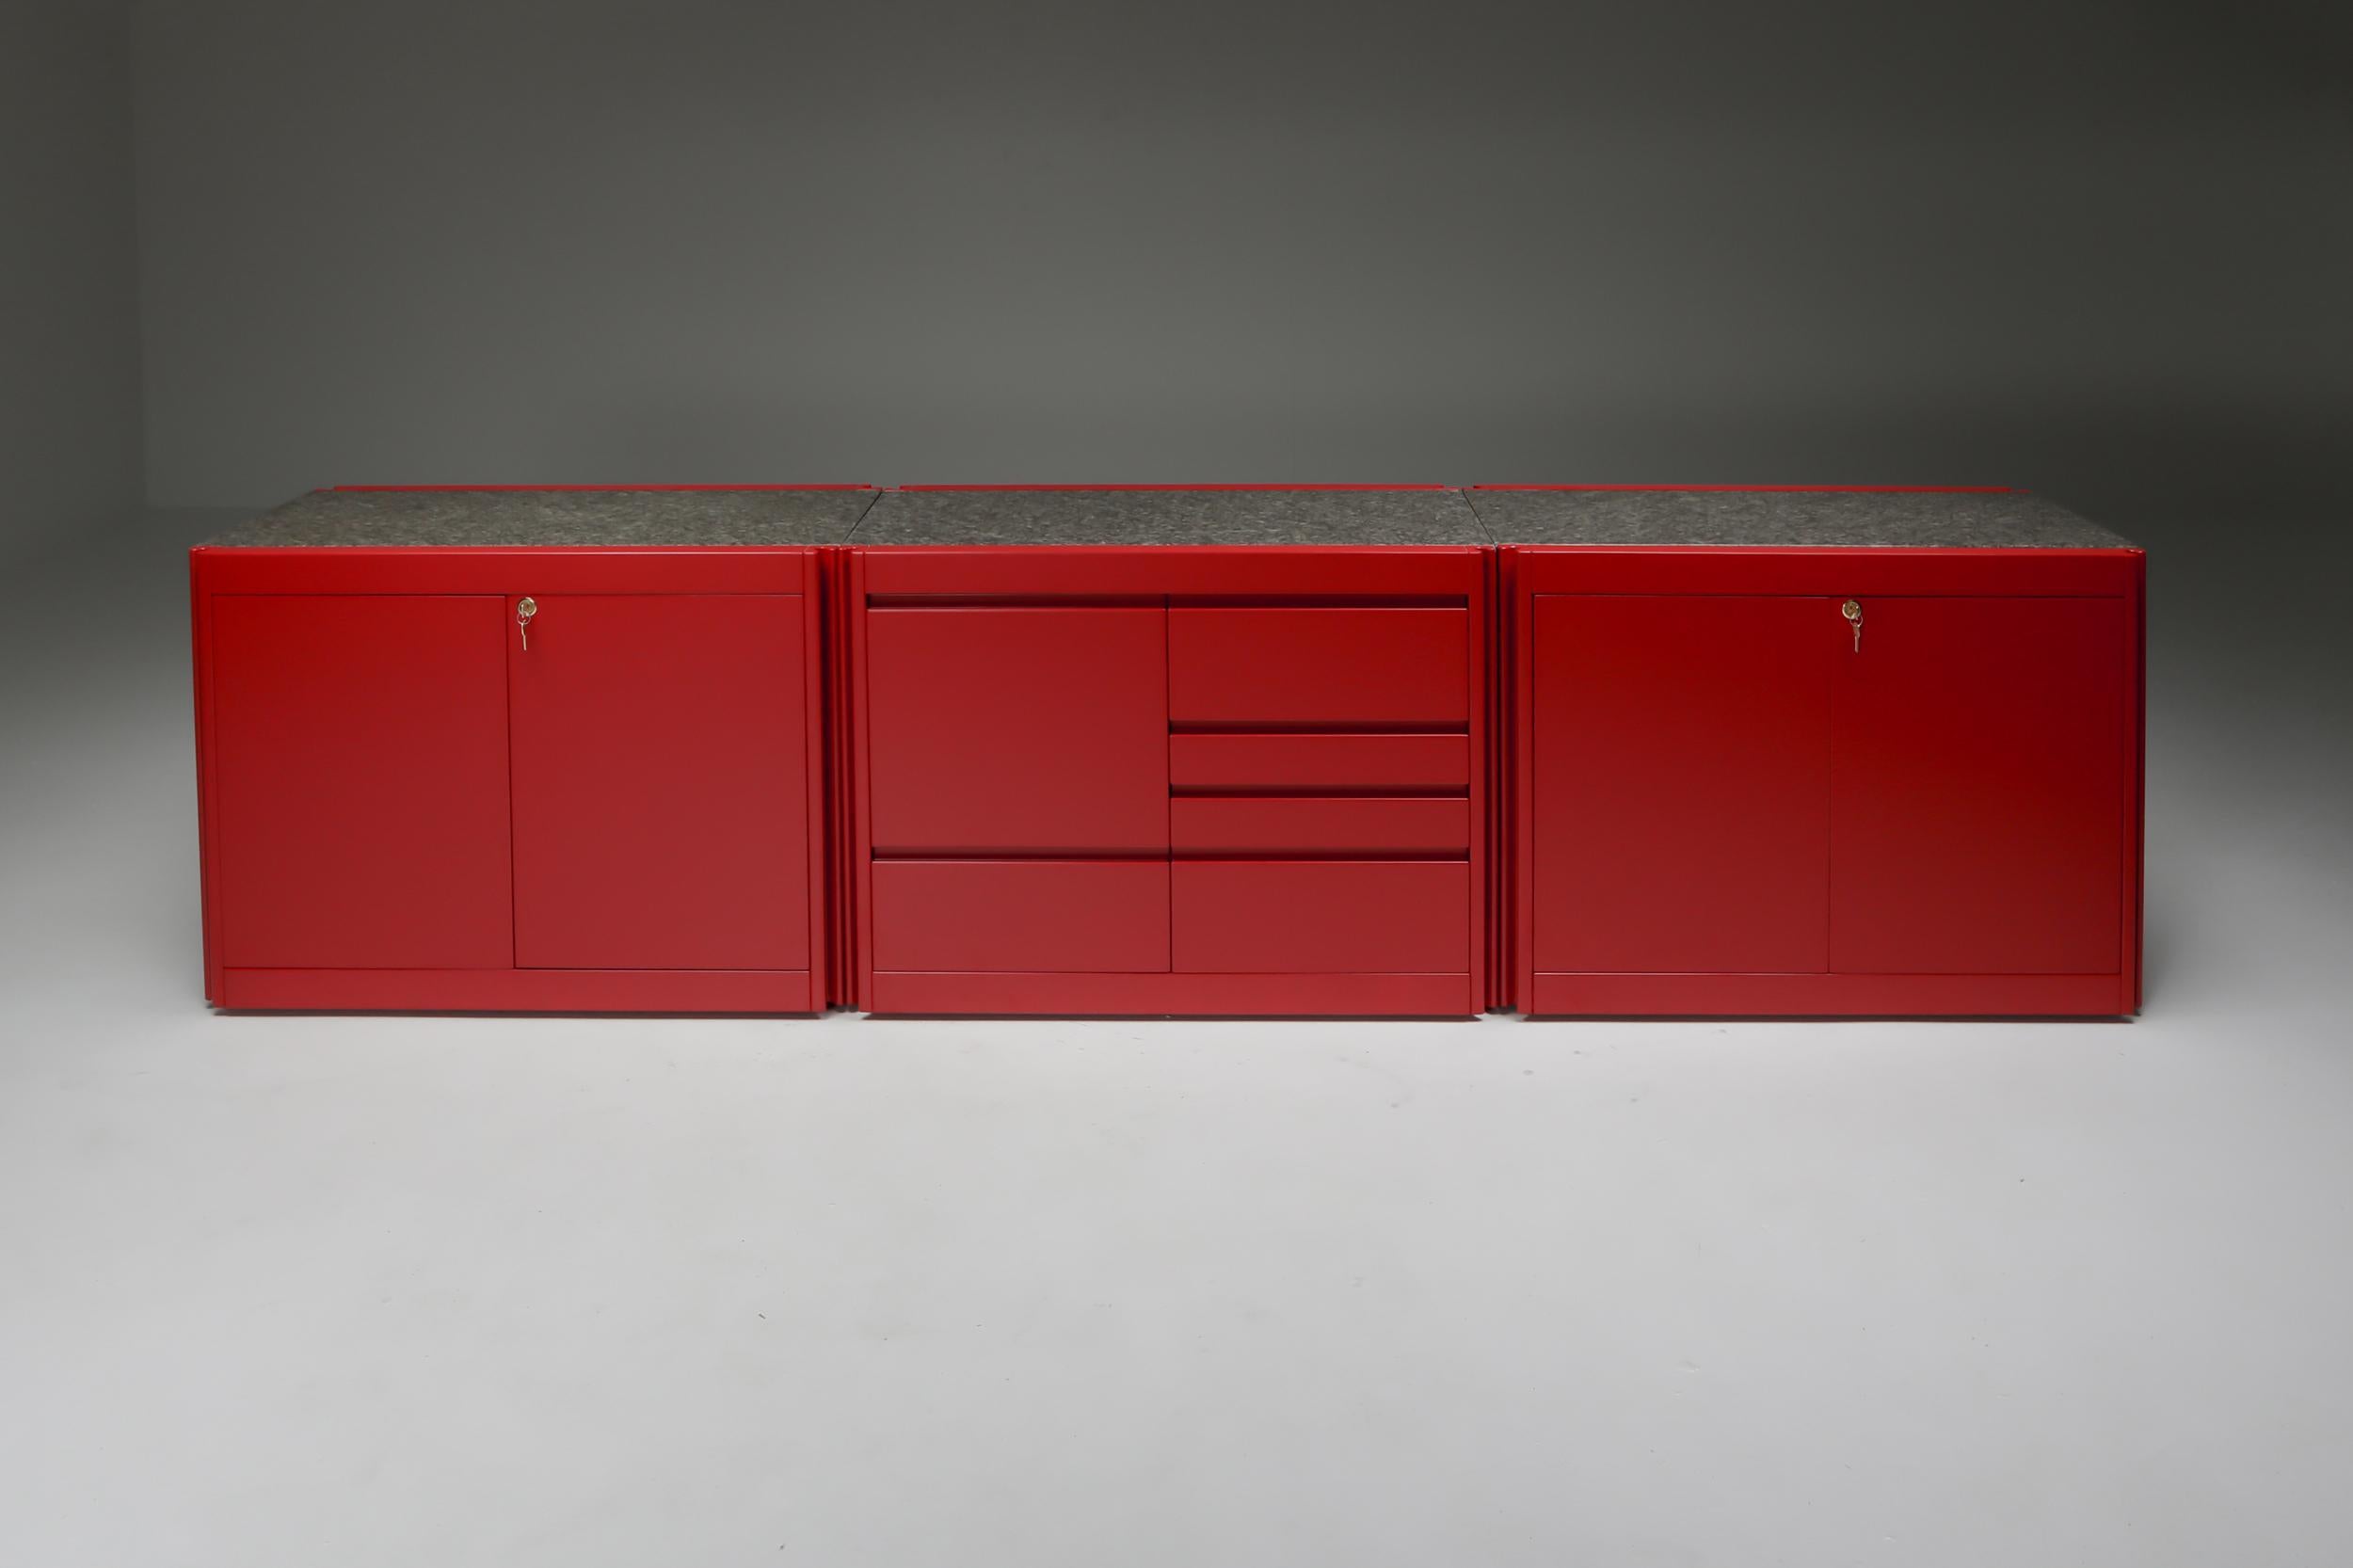 Sideboard; red lacquered; wood; granite; 1970s; Italy; Italian Design; 4D Sideboard by Angelo Mangiarotti for Molteni;

Modular storage unit by Italian designer Angelo Mangiarotti for Molteni, in red lacquered wood and a granite top, designed in the